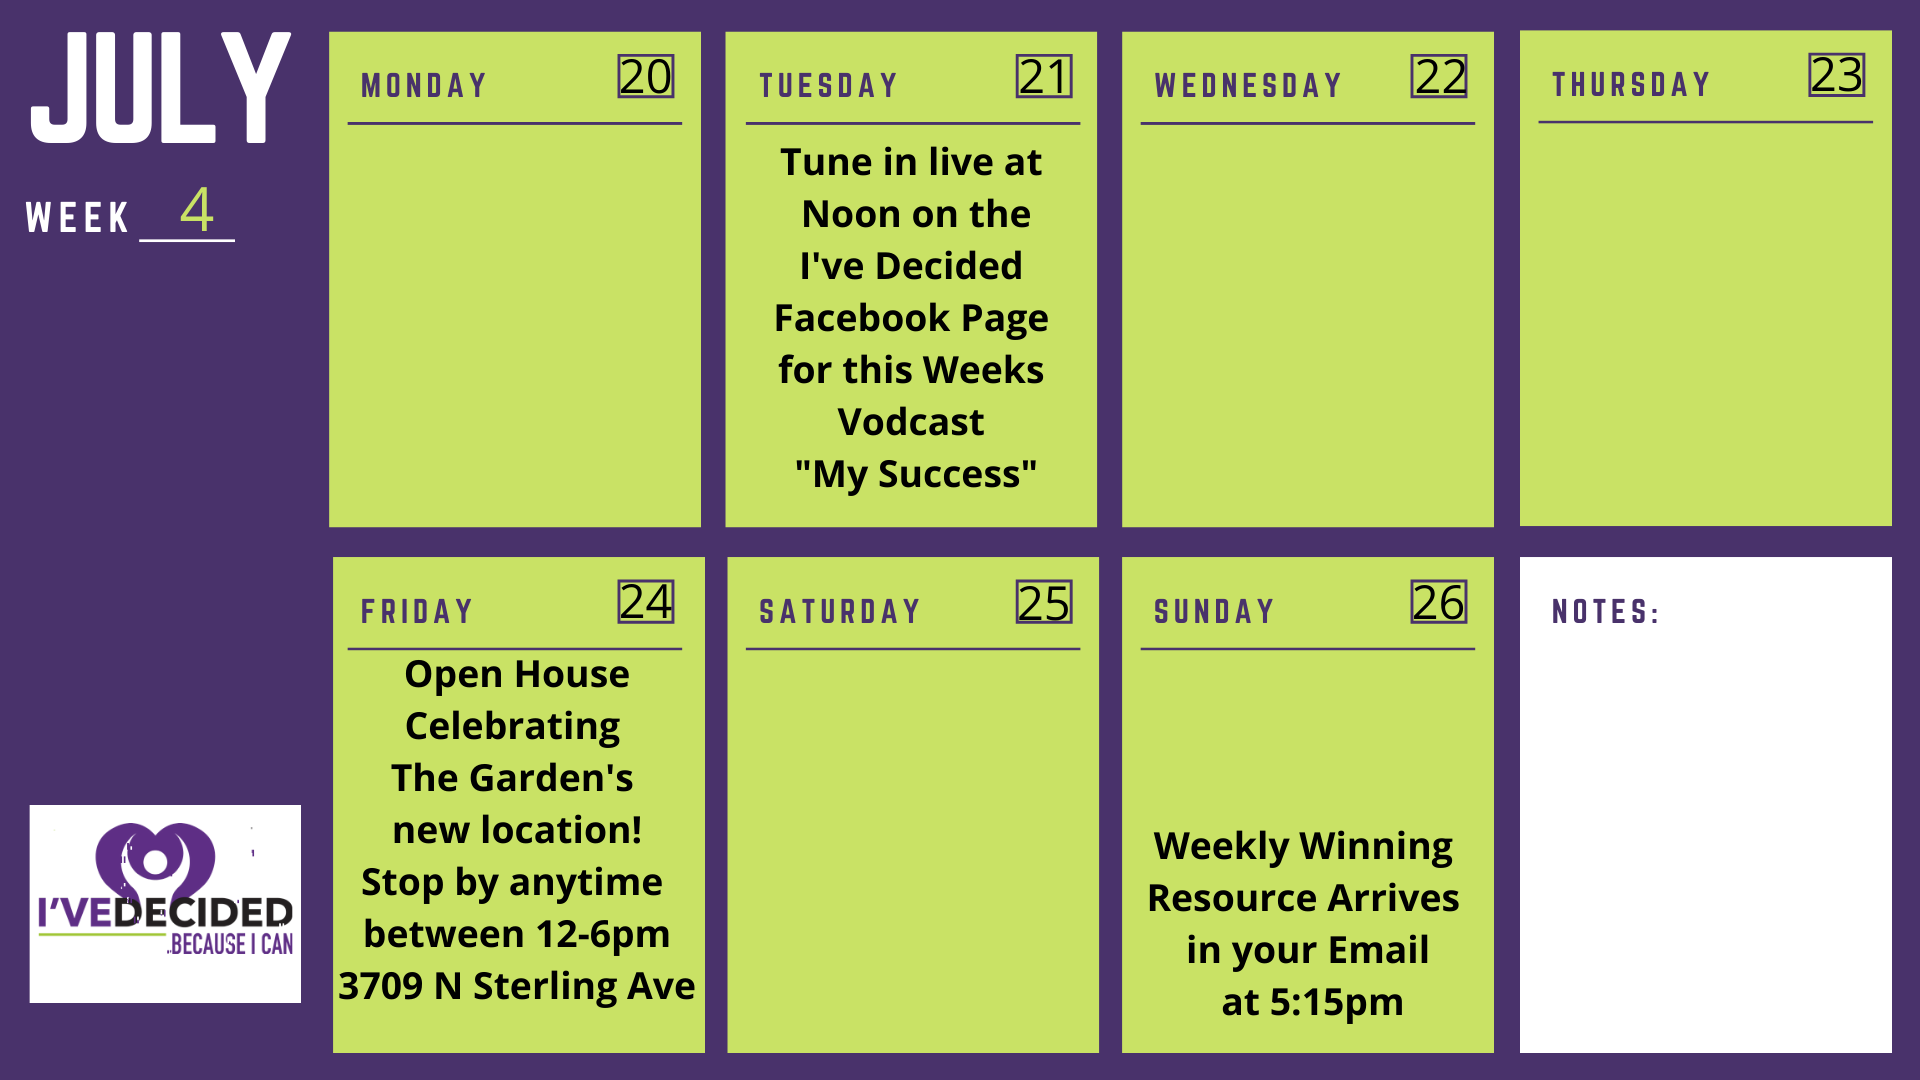 July week 4 Calendar I've Decided Our mission is your success!